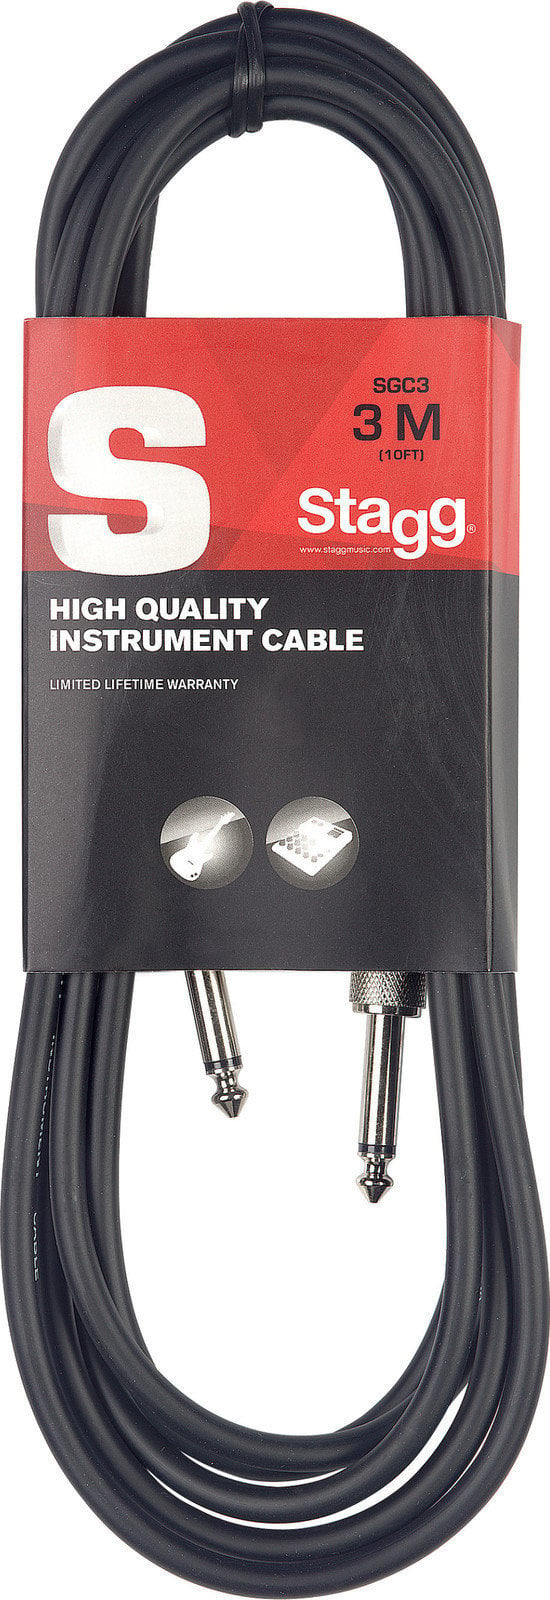 Instrument Cable Stagg SGC3 Black 3 m Straight - Straight